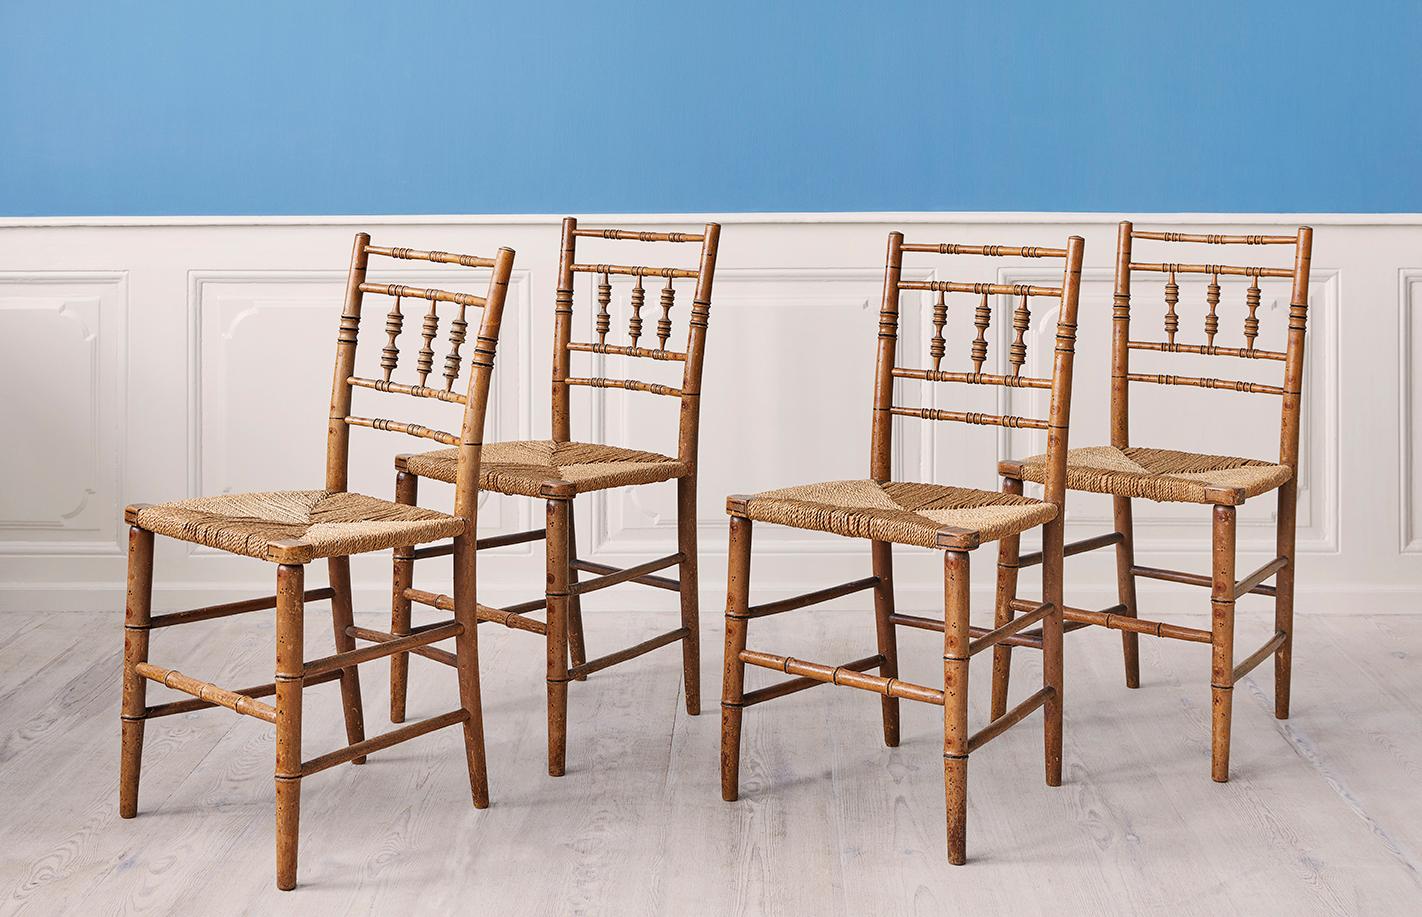 England, early 19th Century

Set of four Regency faux bamboo side chairs.

H 83 x W 44 x D 40 cm